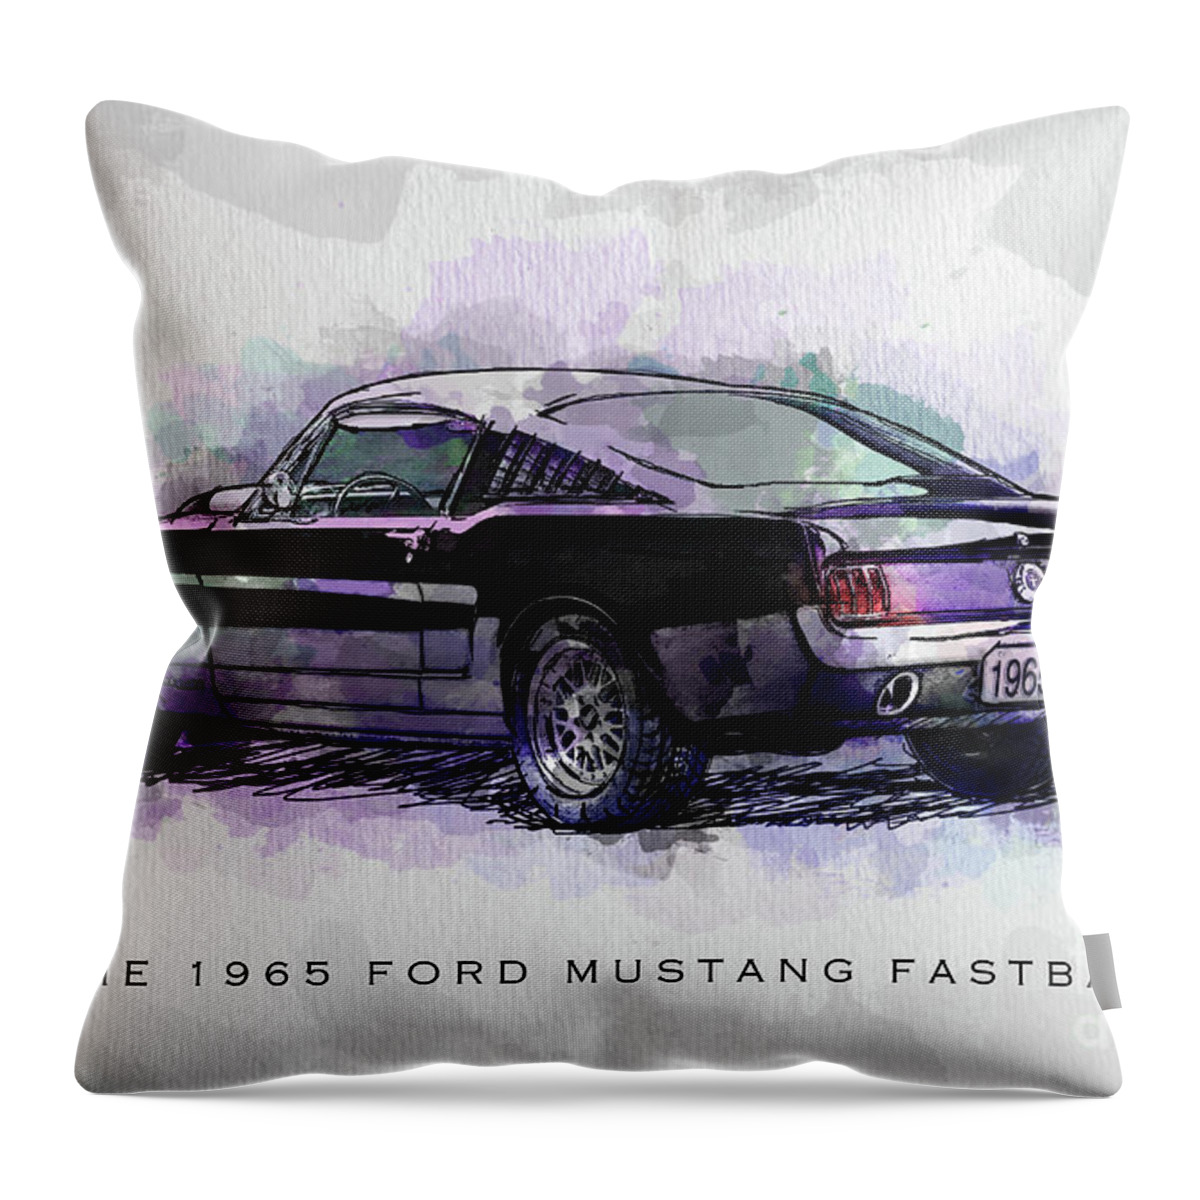 Ford Mustang Throw Pillow featuring the digital art Black Stallion 1965 Ford Mustang Fastback by Gary Bodnar